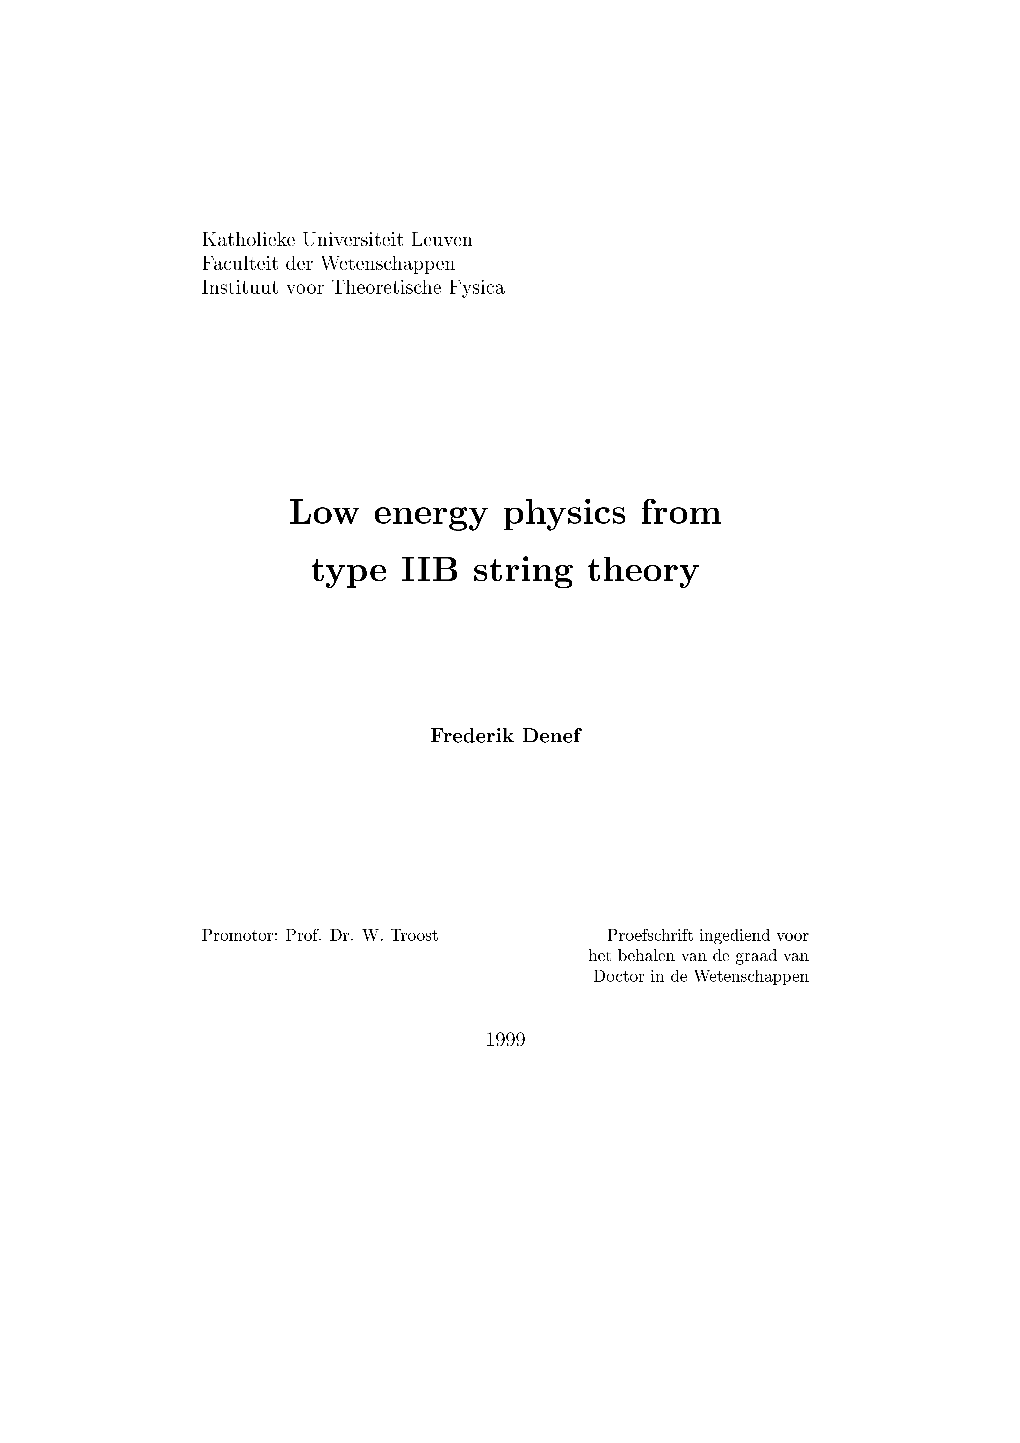 Low Energy Physics from Type IIB String Theory